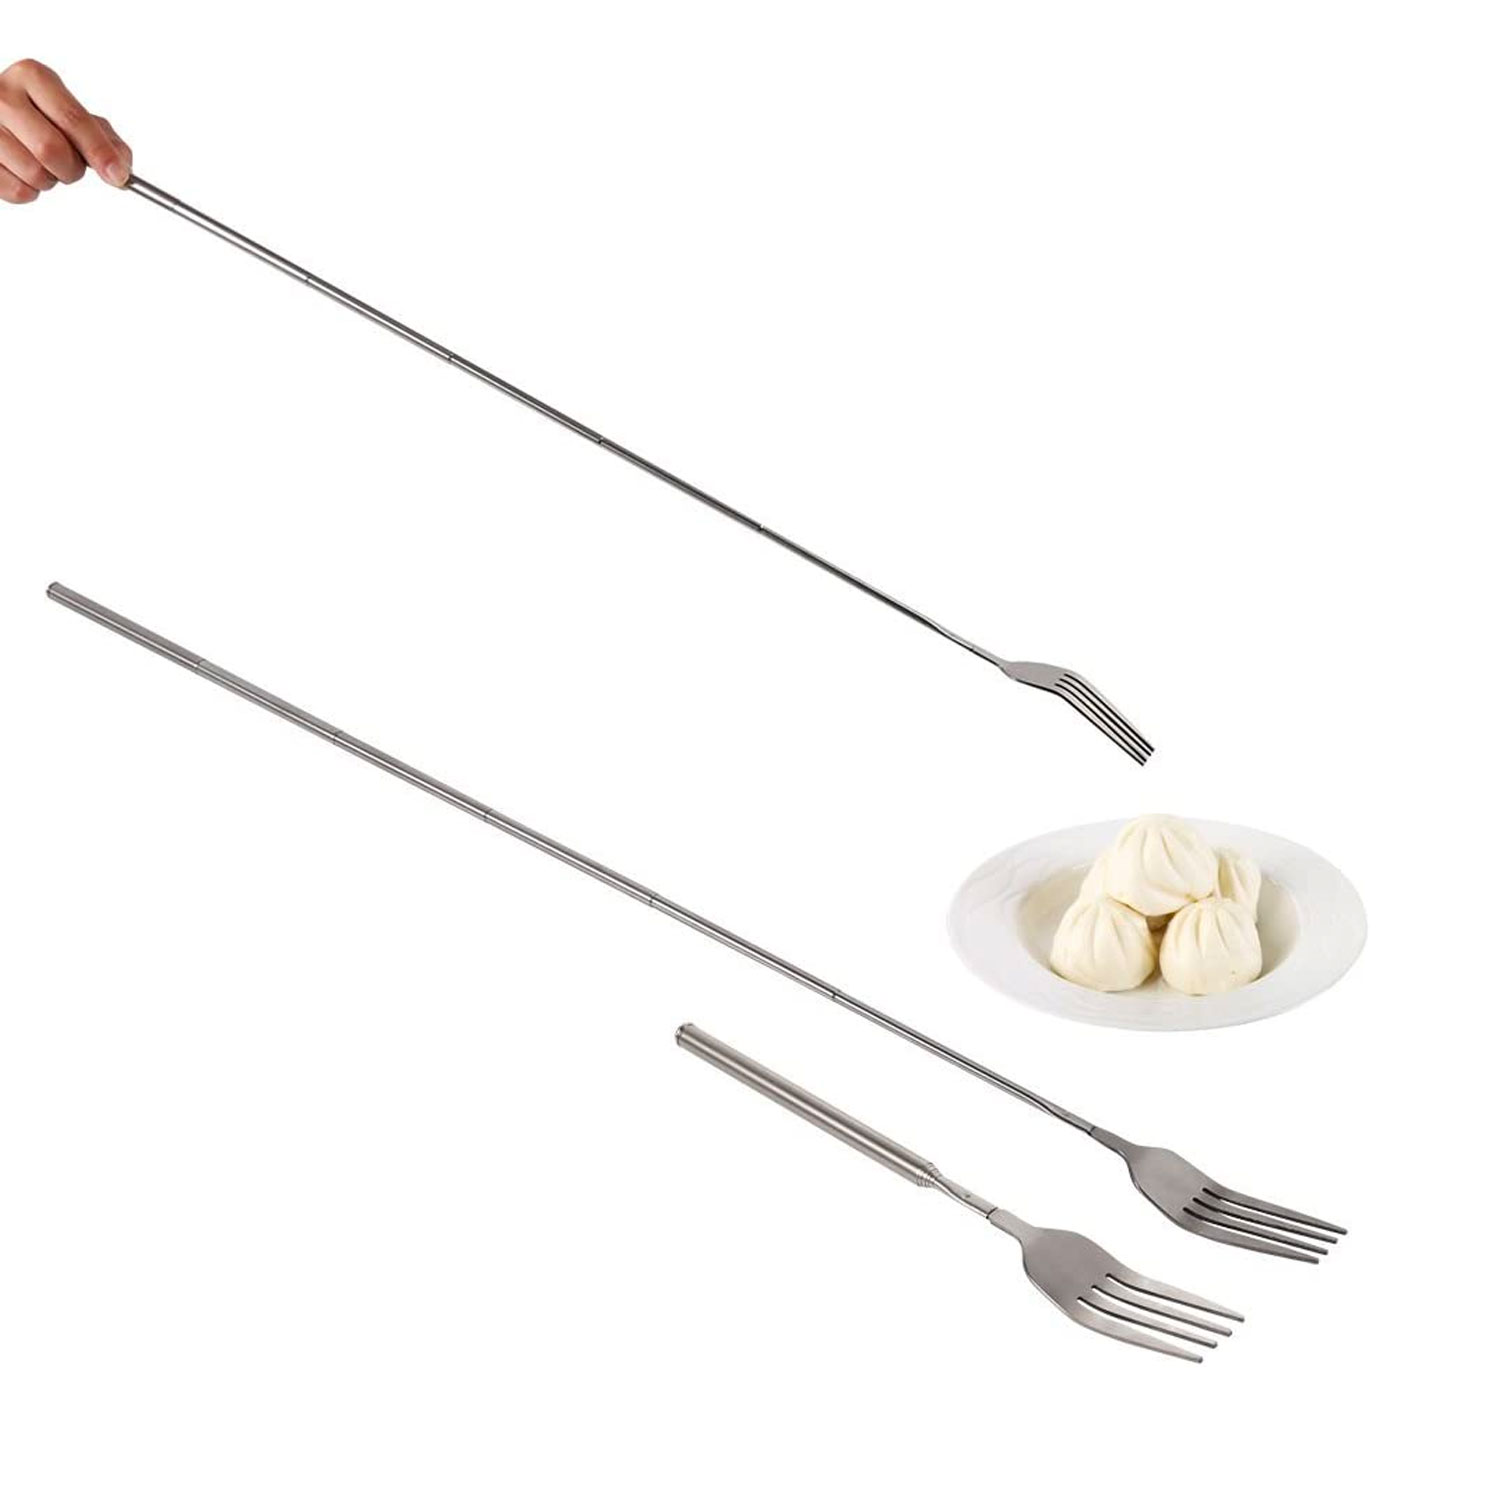 Funny Fork Extendable to 25" inches Telescopic Table Ware 